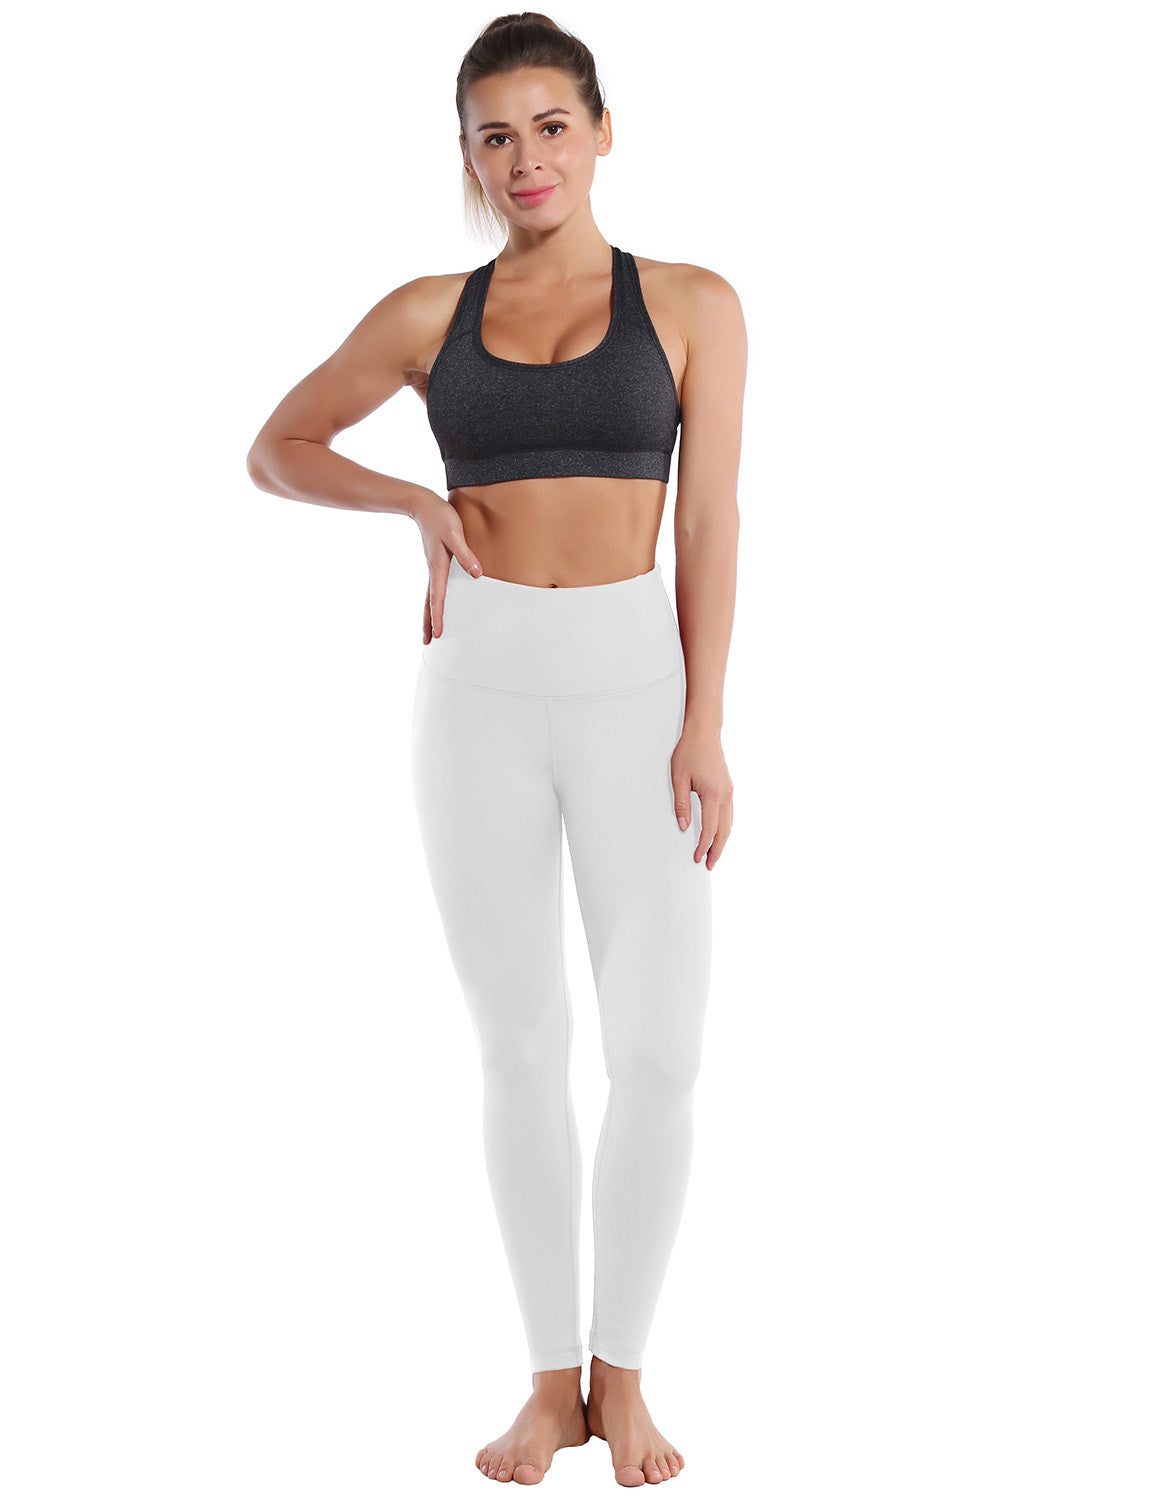 High Waist Golf Pants white 75%Nylon/25%Spandex Fabric doesn't attract lint easily 4-way stretch No see-through Moisture-wicking Tummy control Inner pocket Four lengths